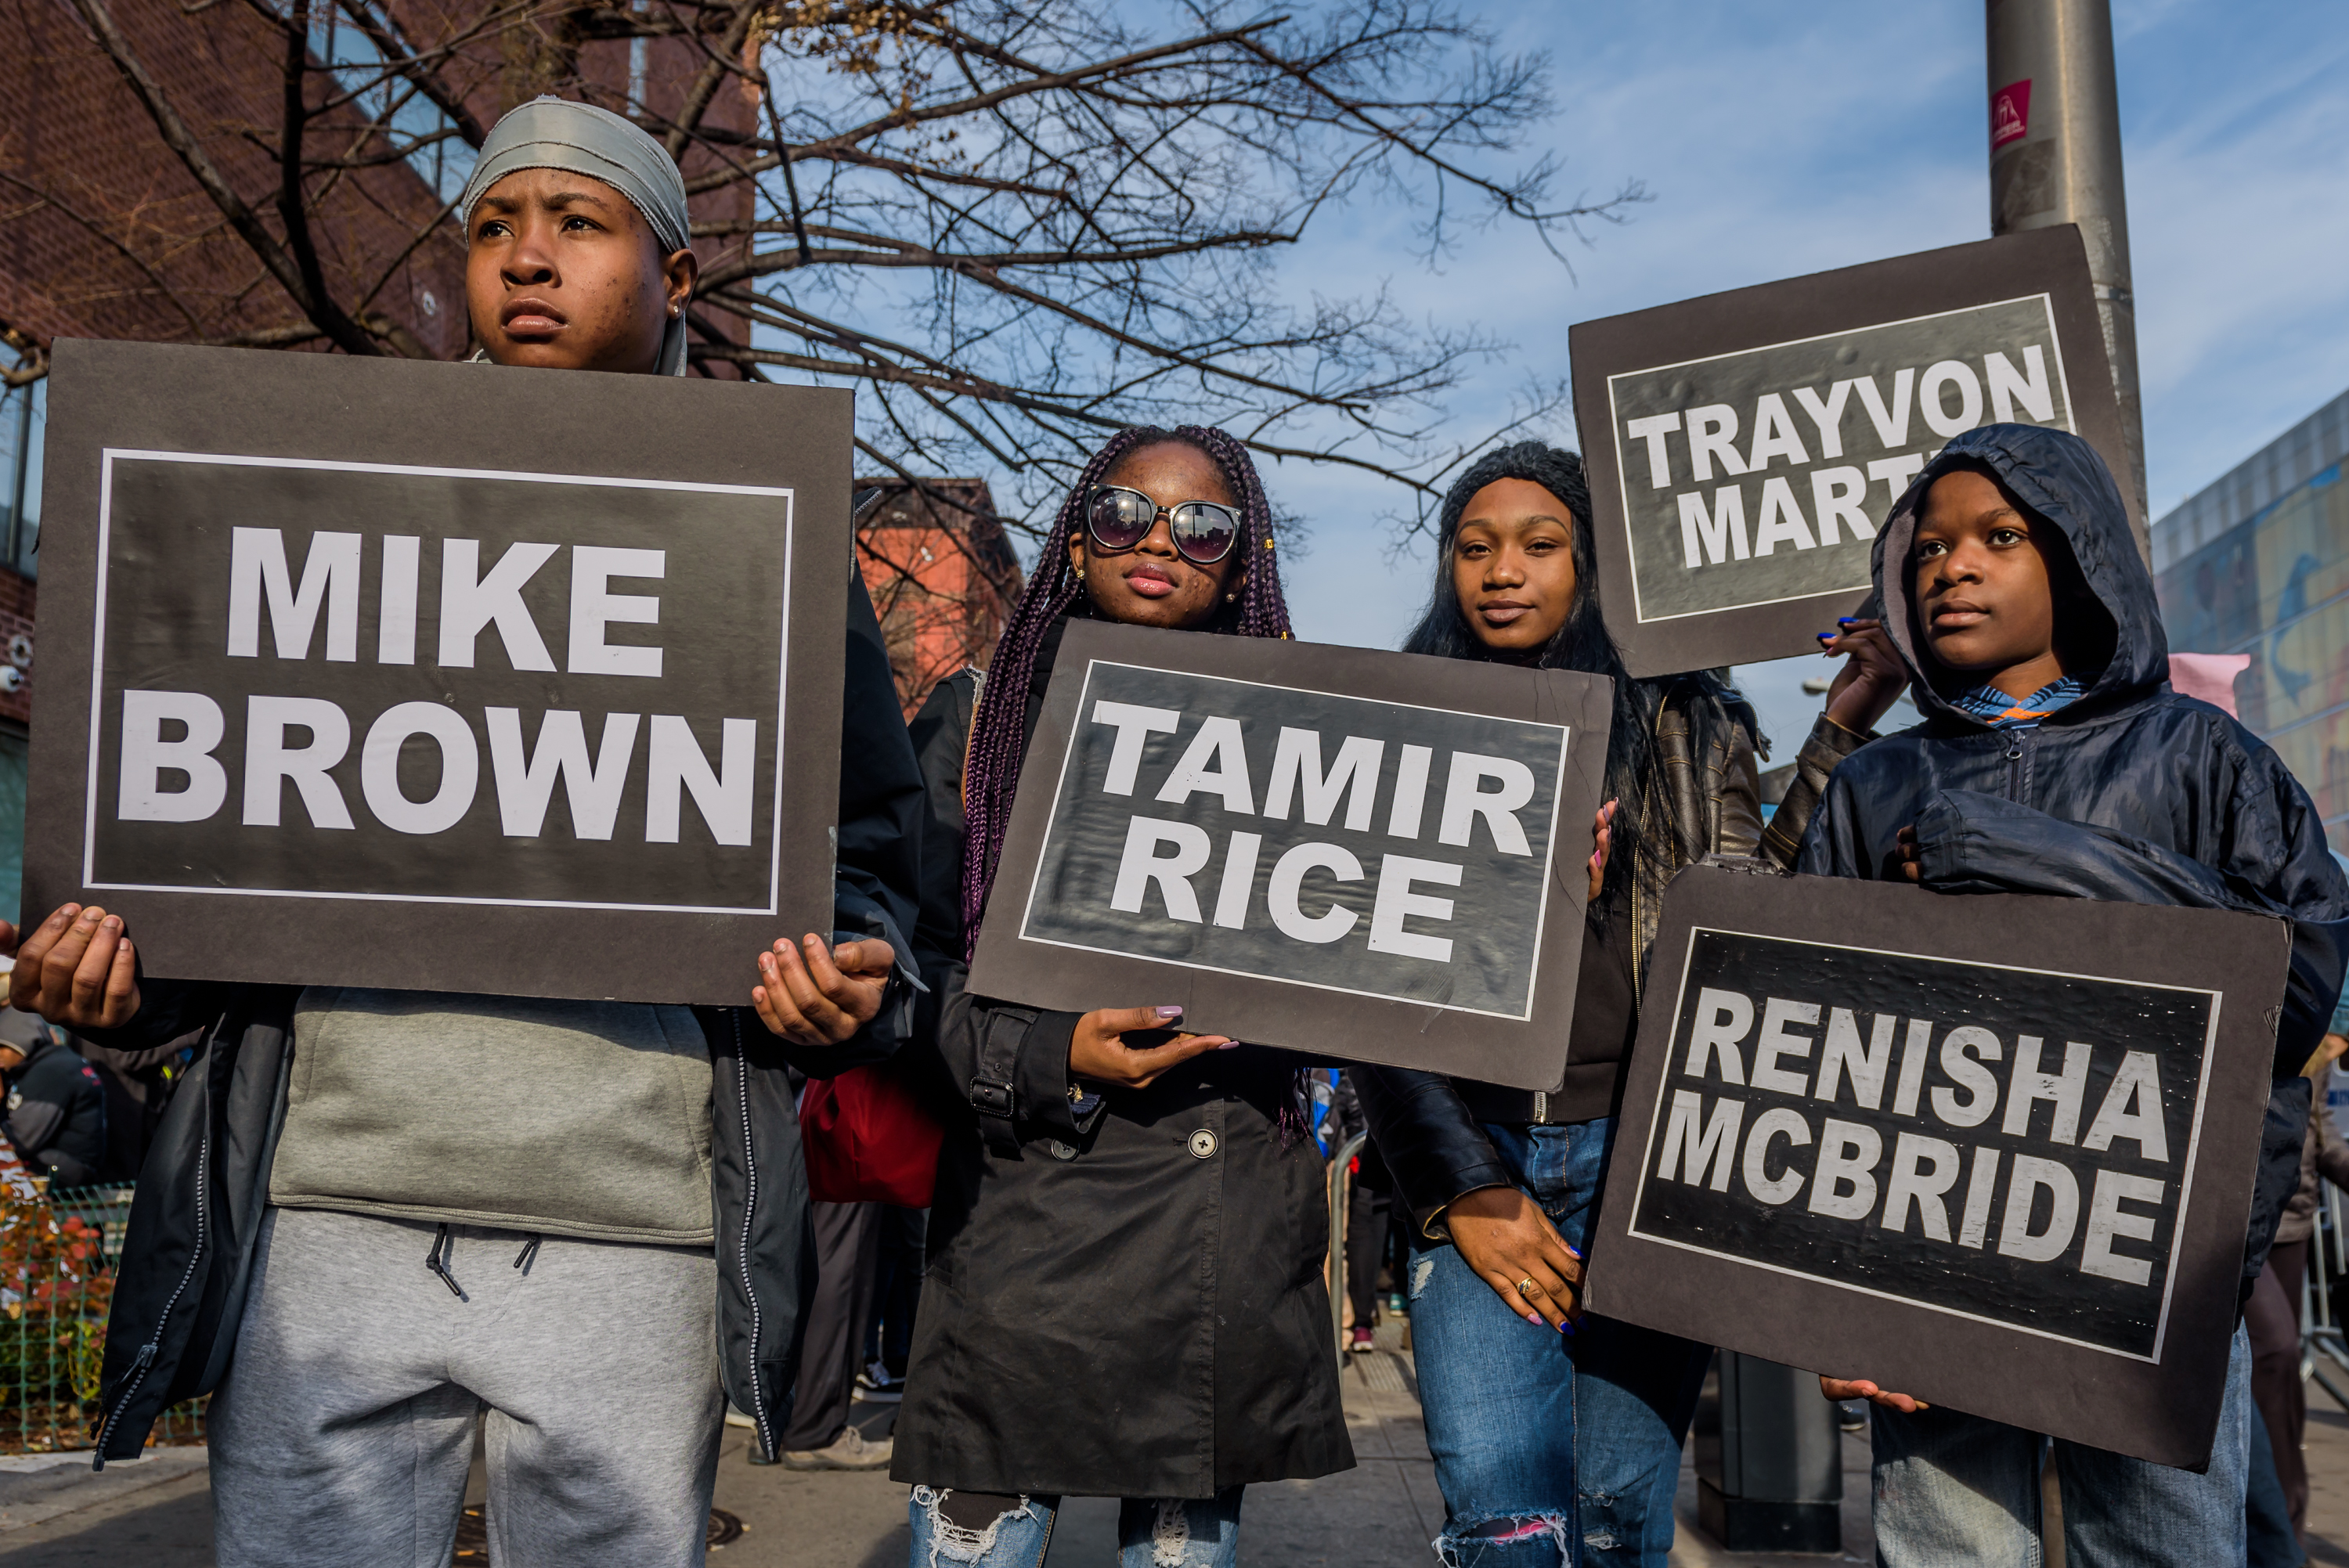 Students from South Bronx Community Charter High School with help from community leaders gathered at the Schomburg Center for Research in Black Culture in Harlem and led the second annual Future of the City March against police brutality on December 2, 2017; marching with students from other New York City schools against police brutality and the unjust treatment of people of color. (Pacific Press—LightRocket via Getty Images)